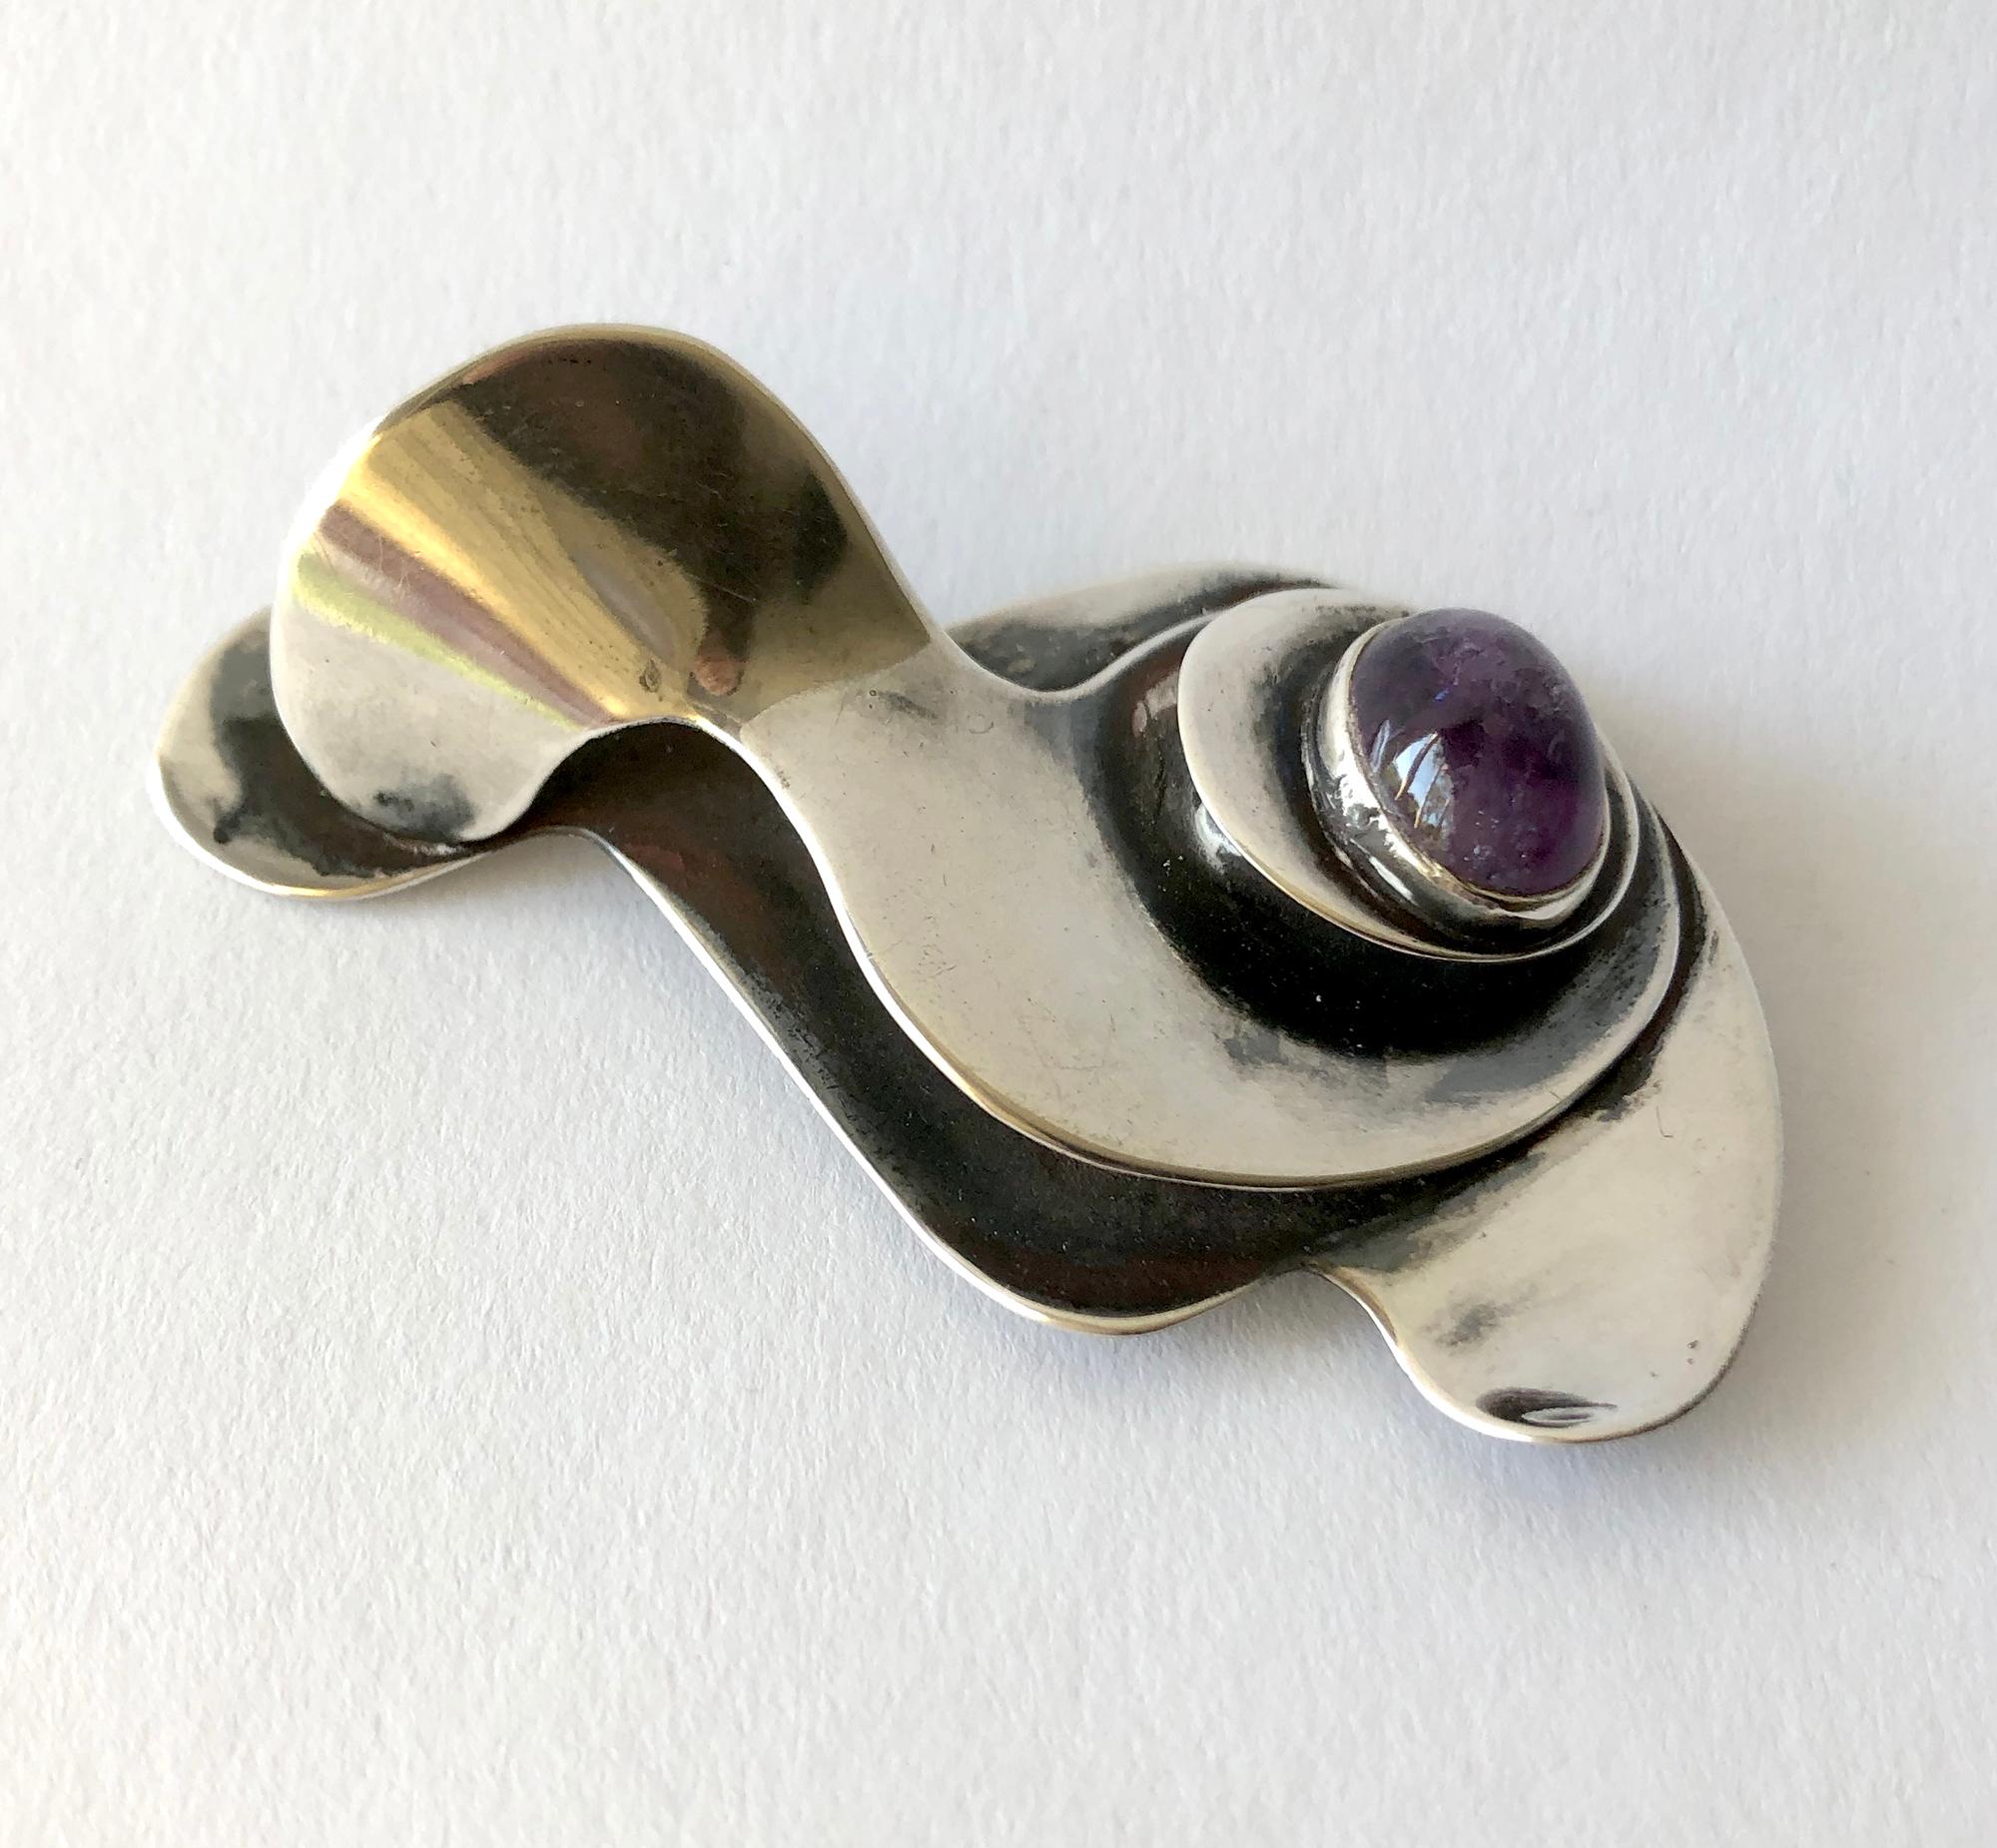 An early multi layered sterling silver and amethyst brooch designed by Joan Hurst and Jill Kingsbury of New York City, New York.  This is a large example of their work and has surrealist influence as seen in works by Sam Kramer. The brooch measures